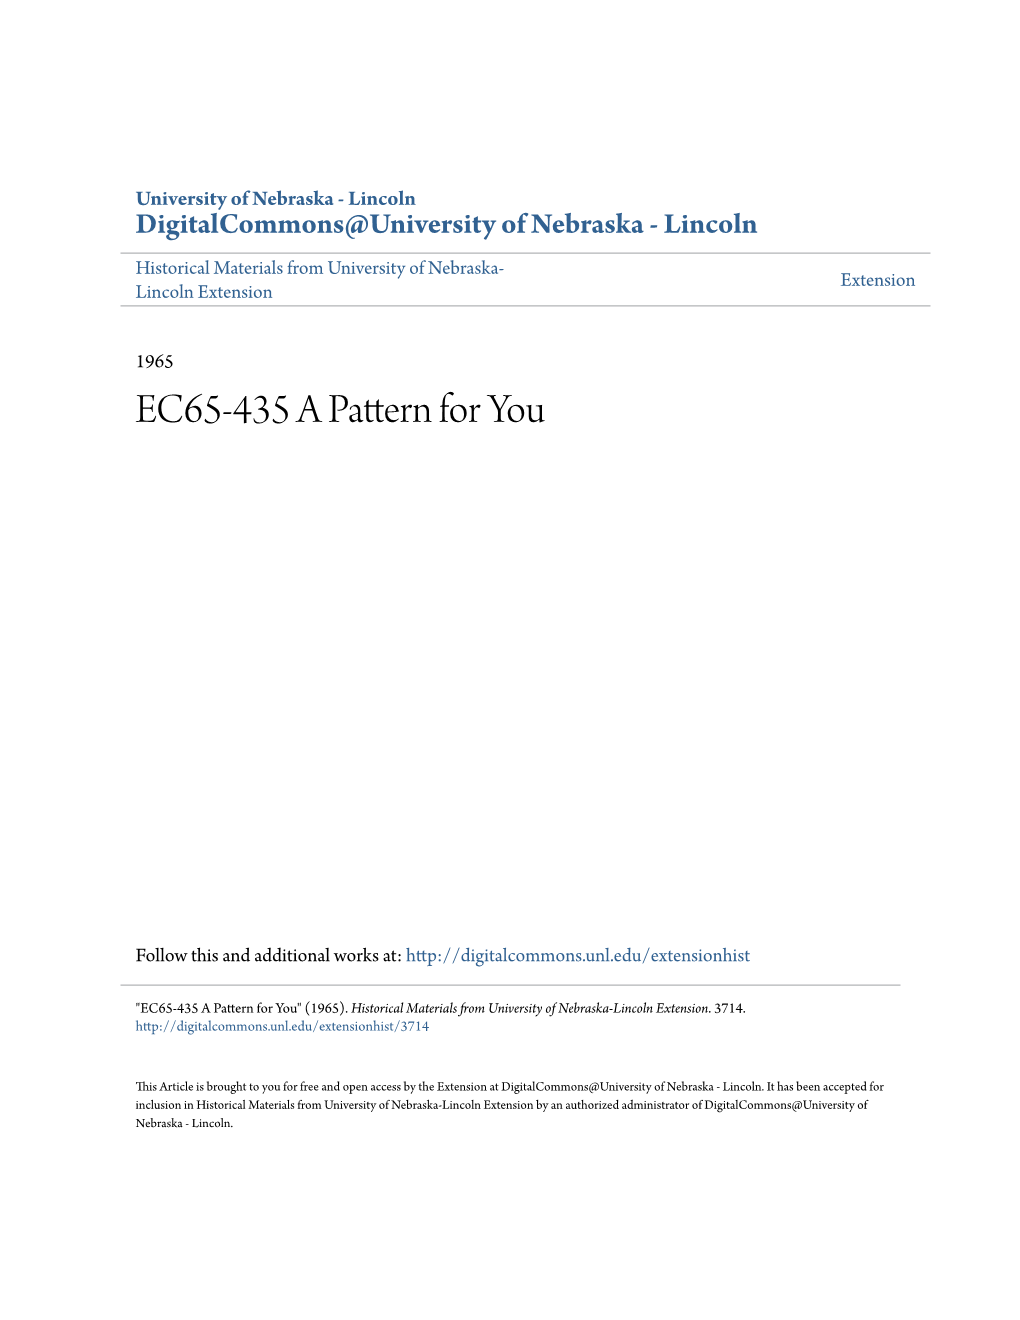 EC65-435 a Pattern for You